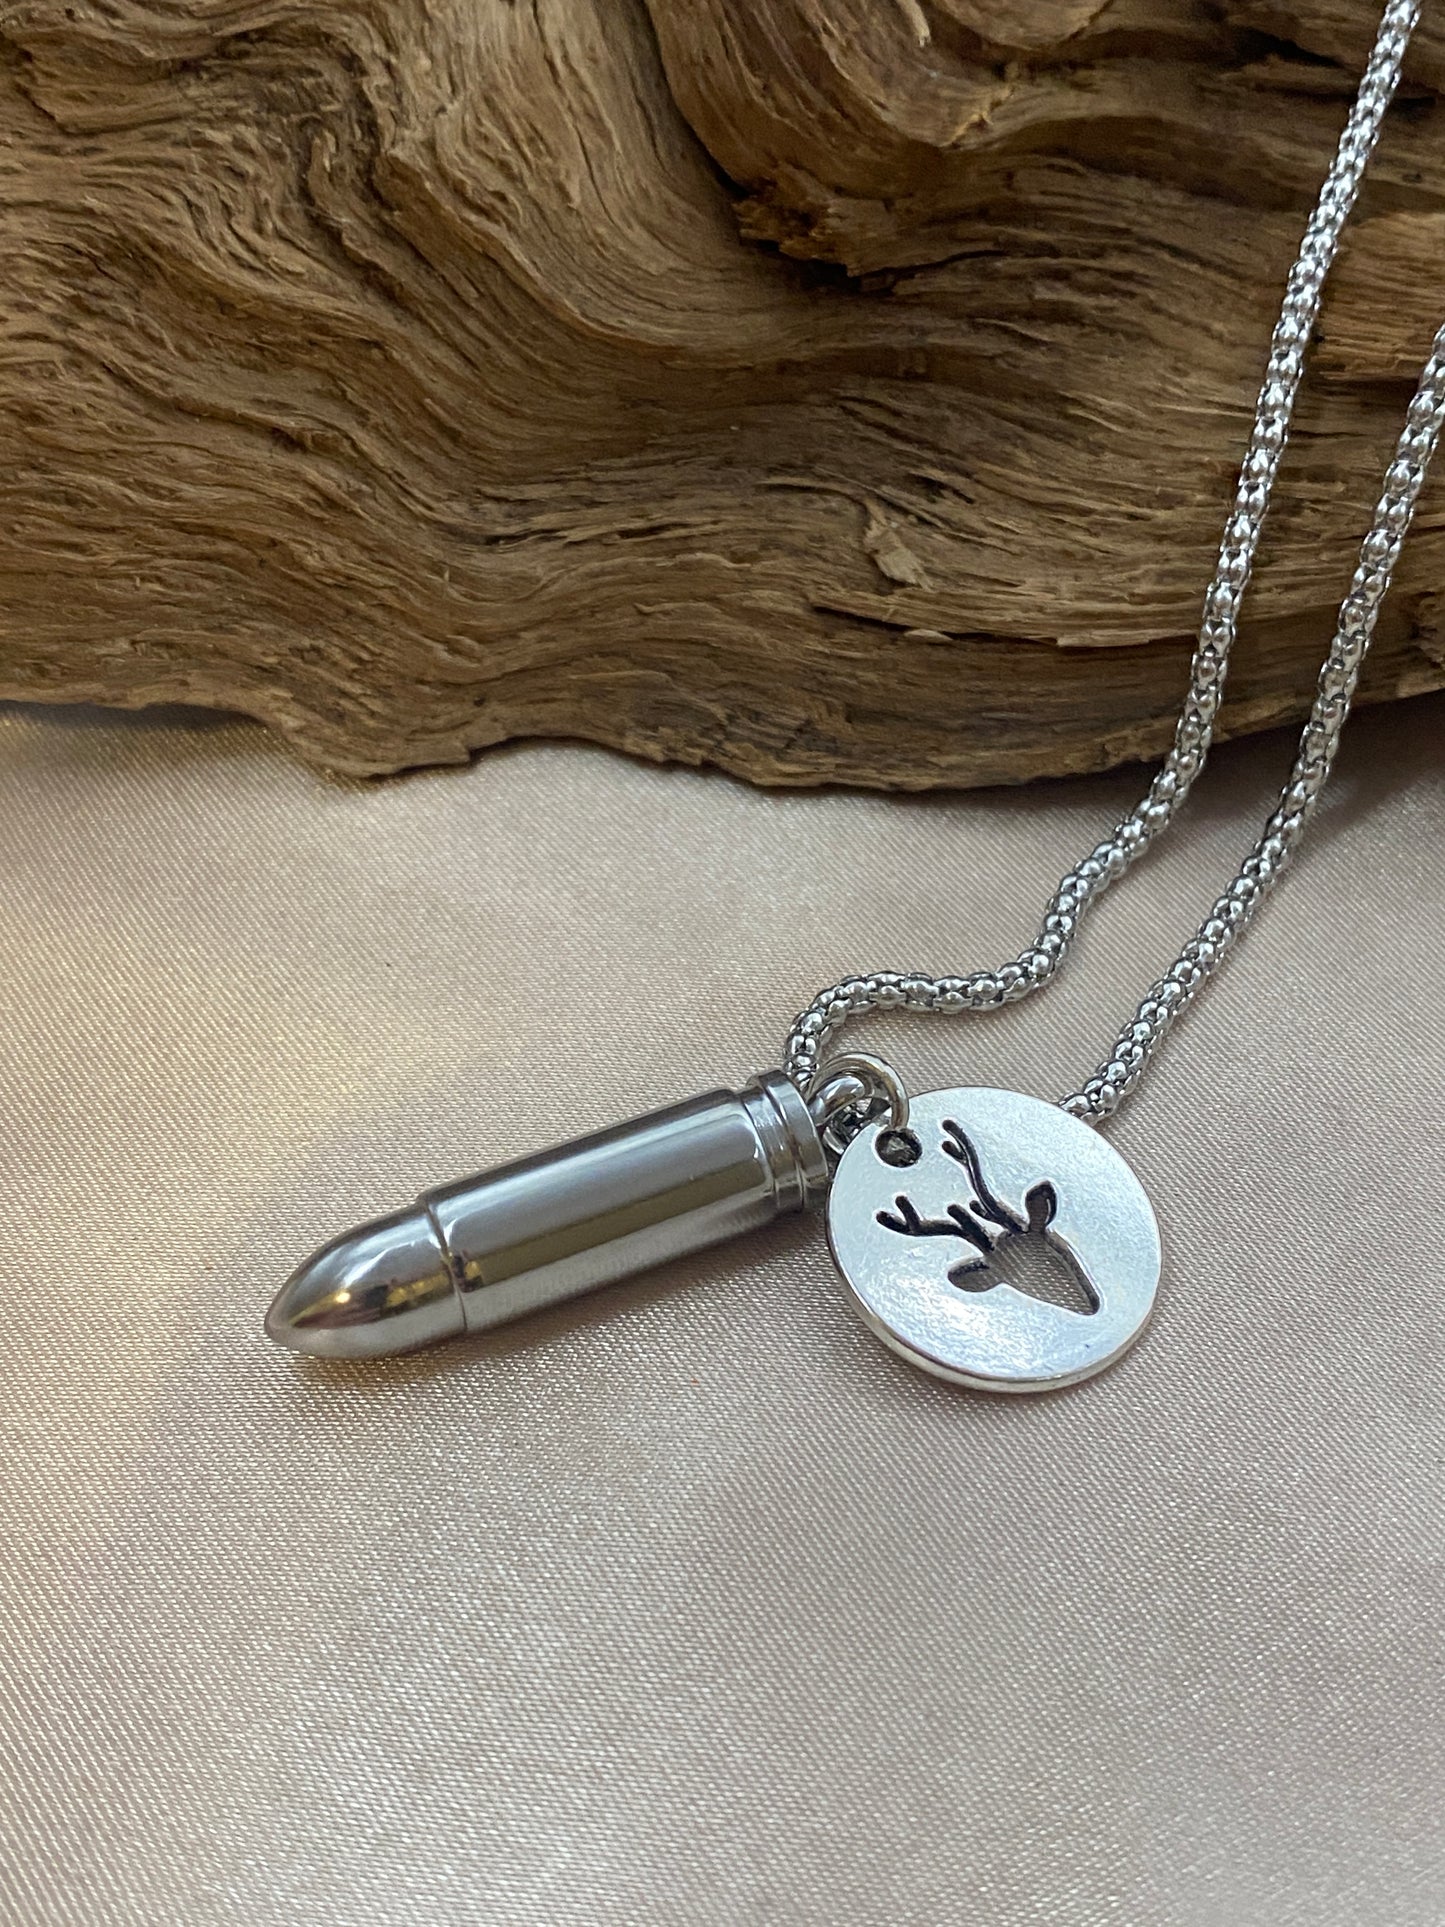 Personalized Bullet Cremation Necklace, bullet pendant for human ashes, hunting necklace, memorial urn necklaces, ash jewelry for men